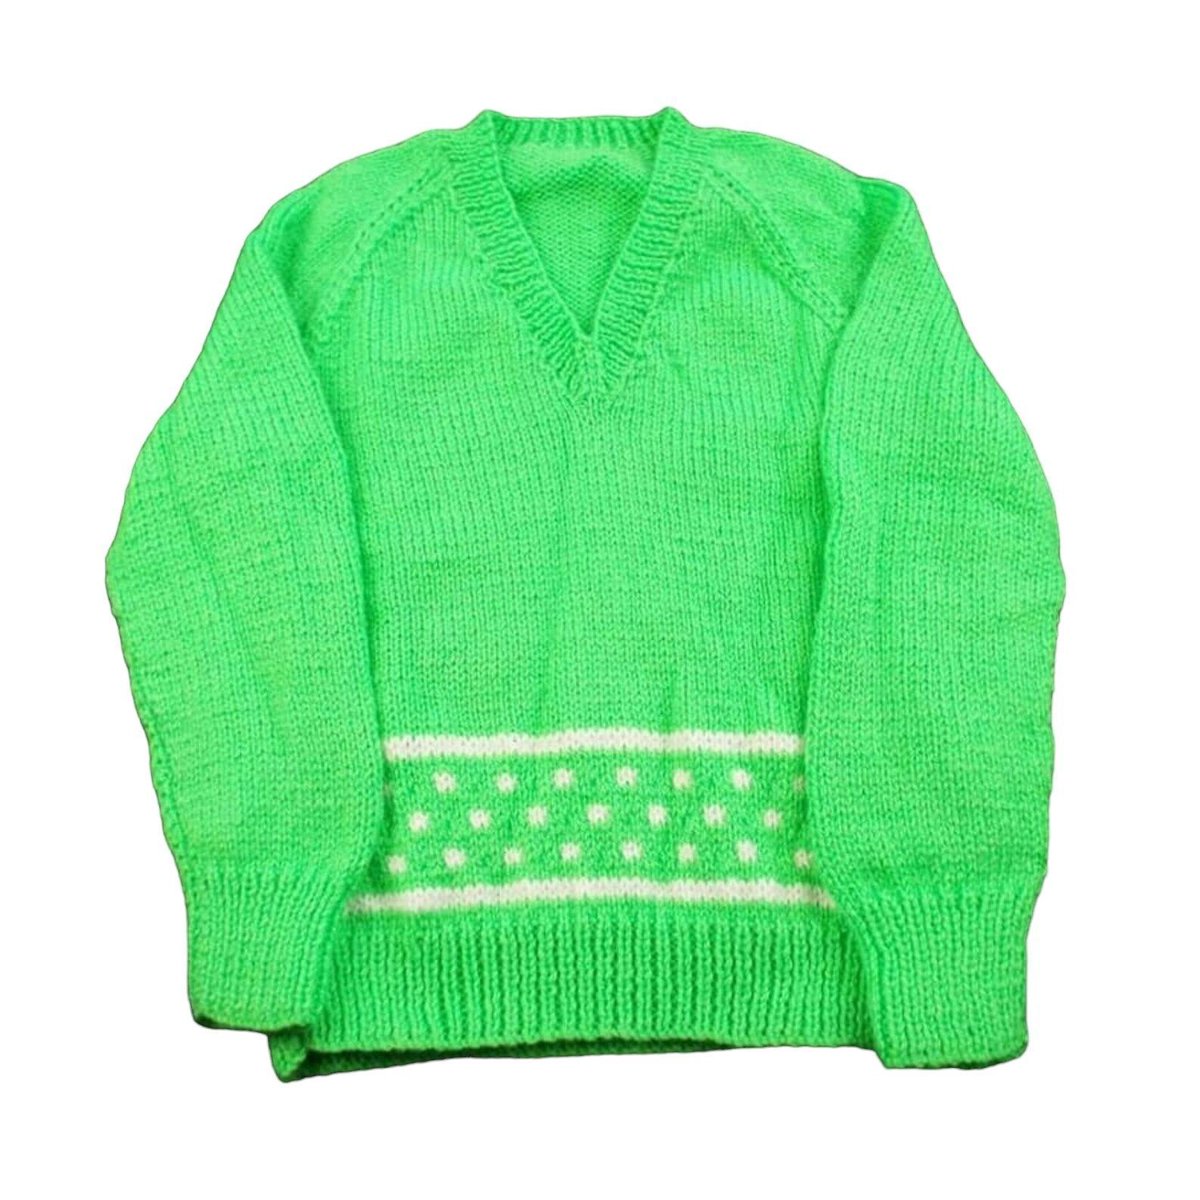 Brighten up the wardrobe with this vibrant hand-knitted v-neck jumper for boys and girls. Made with love and fits a 26-inch chest. Visit my #Etsy store now! #Knittingtopia #Handmade knittingtopia.etsy.com/listing/169607… #craftbizparty #MHHSBD